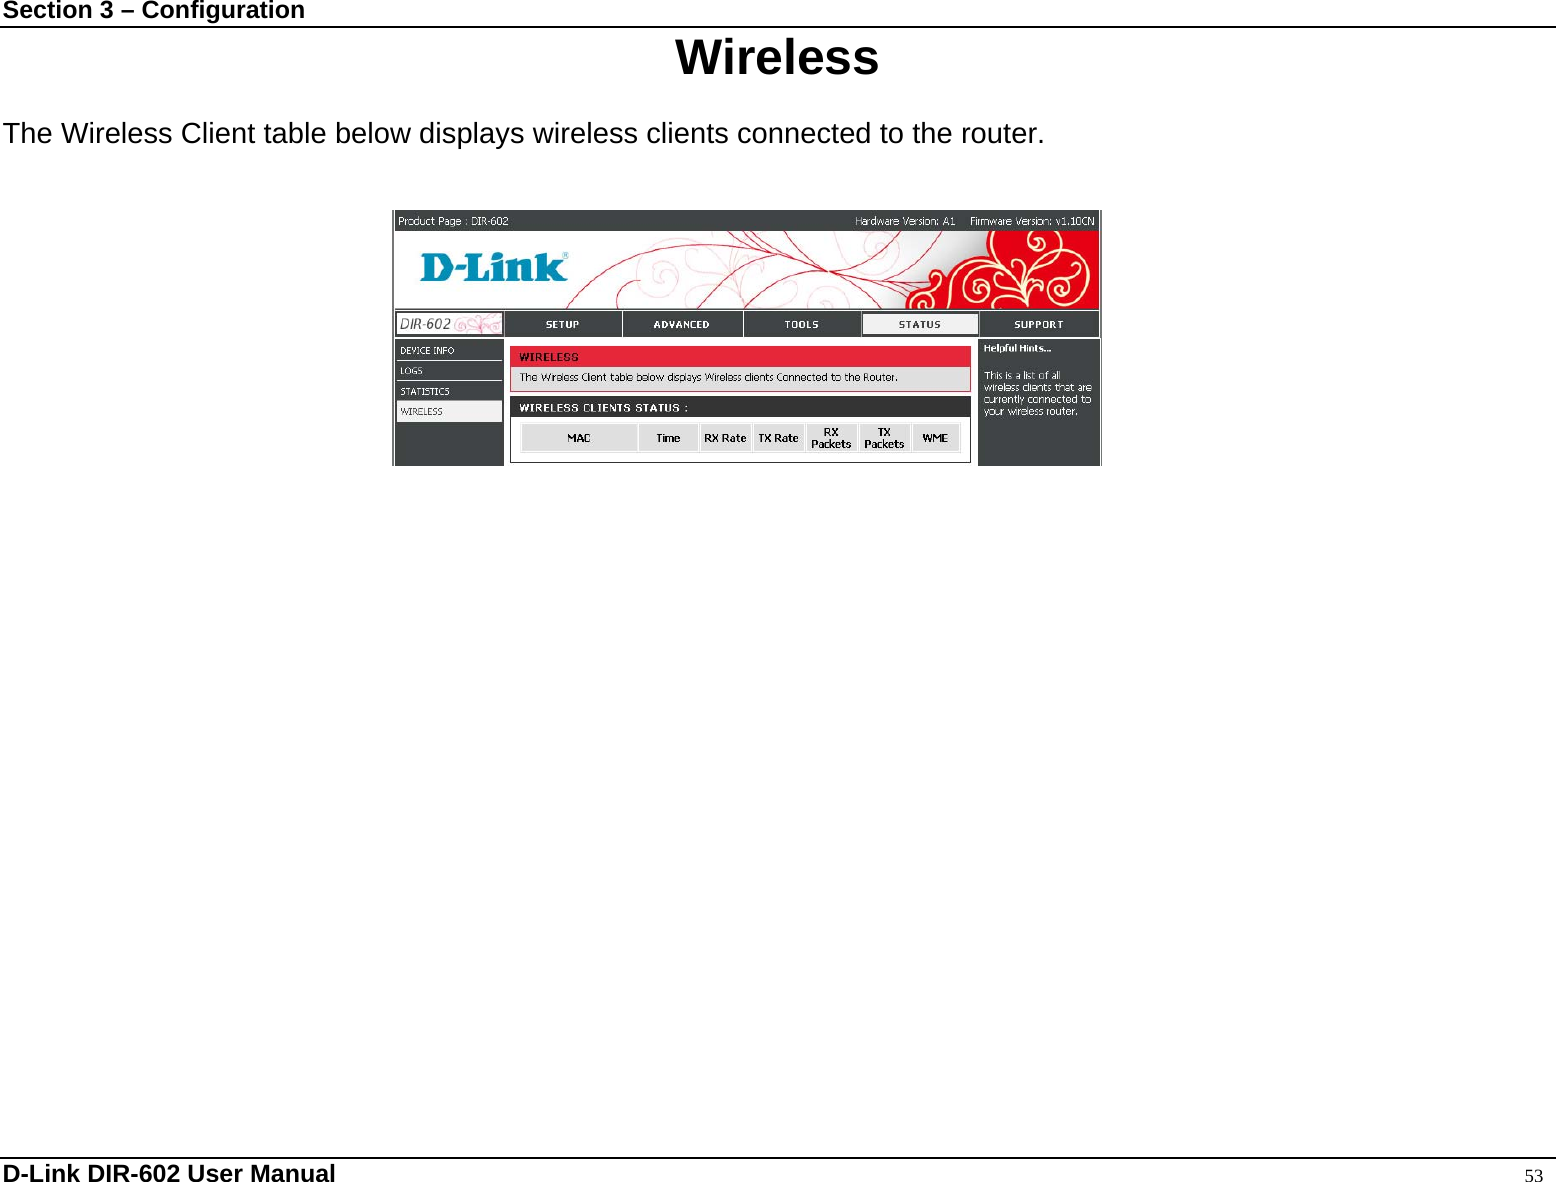 Section 3 – Configuration  Wireless  The Wireless Client table below displays wireless clients connected to the router.                D-Link DIR-602 User Manual                                                                                               53 